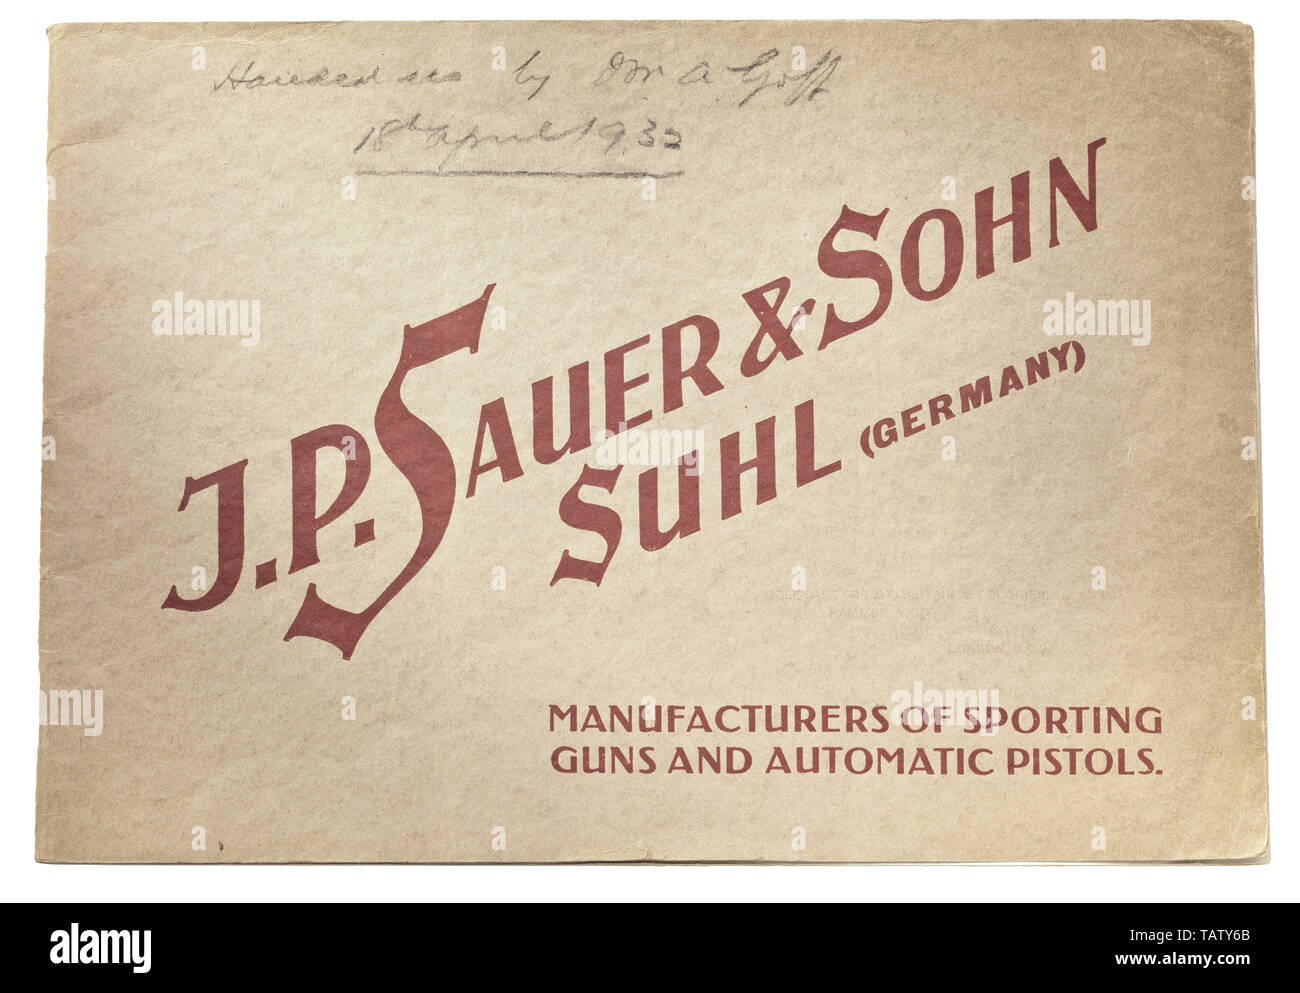 GUNS, LITERATURE, English catalogue of Sauer & Sohn company, Suhl, circa 1928, Additional-Rights-Clearance-Info-Not-Available Stock Photo